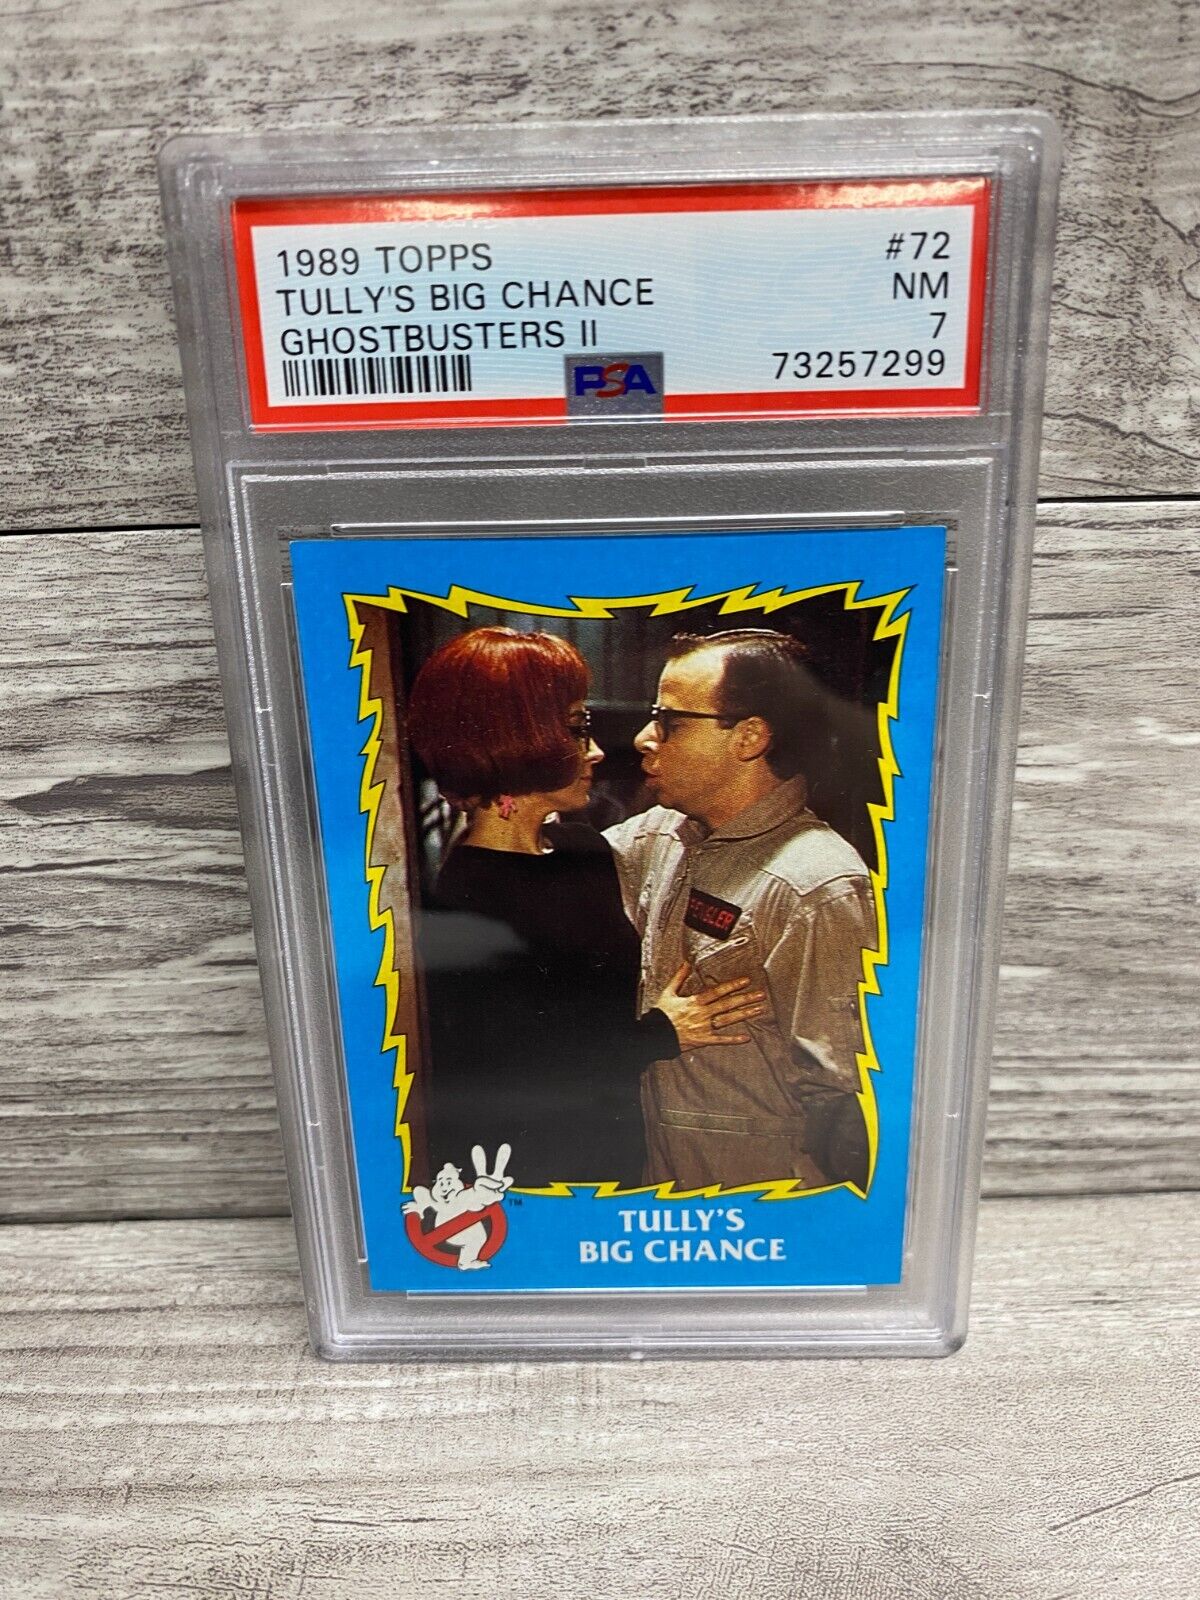 1989 TOPPS 2 GHOSTBUSTERS II #72 Tully\'s Big Chance PSA 7 NM